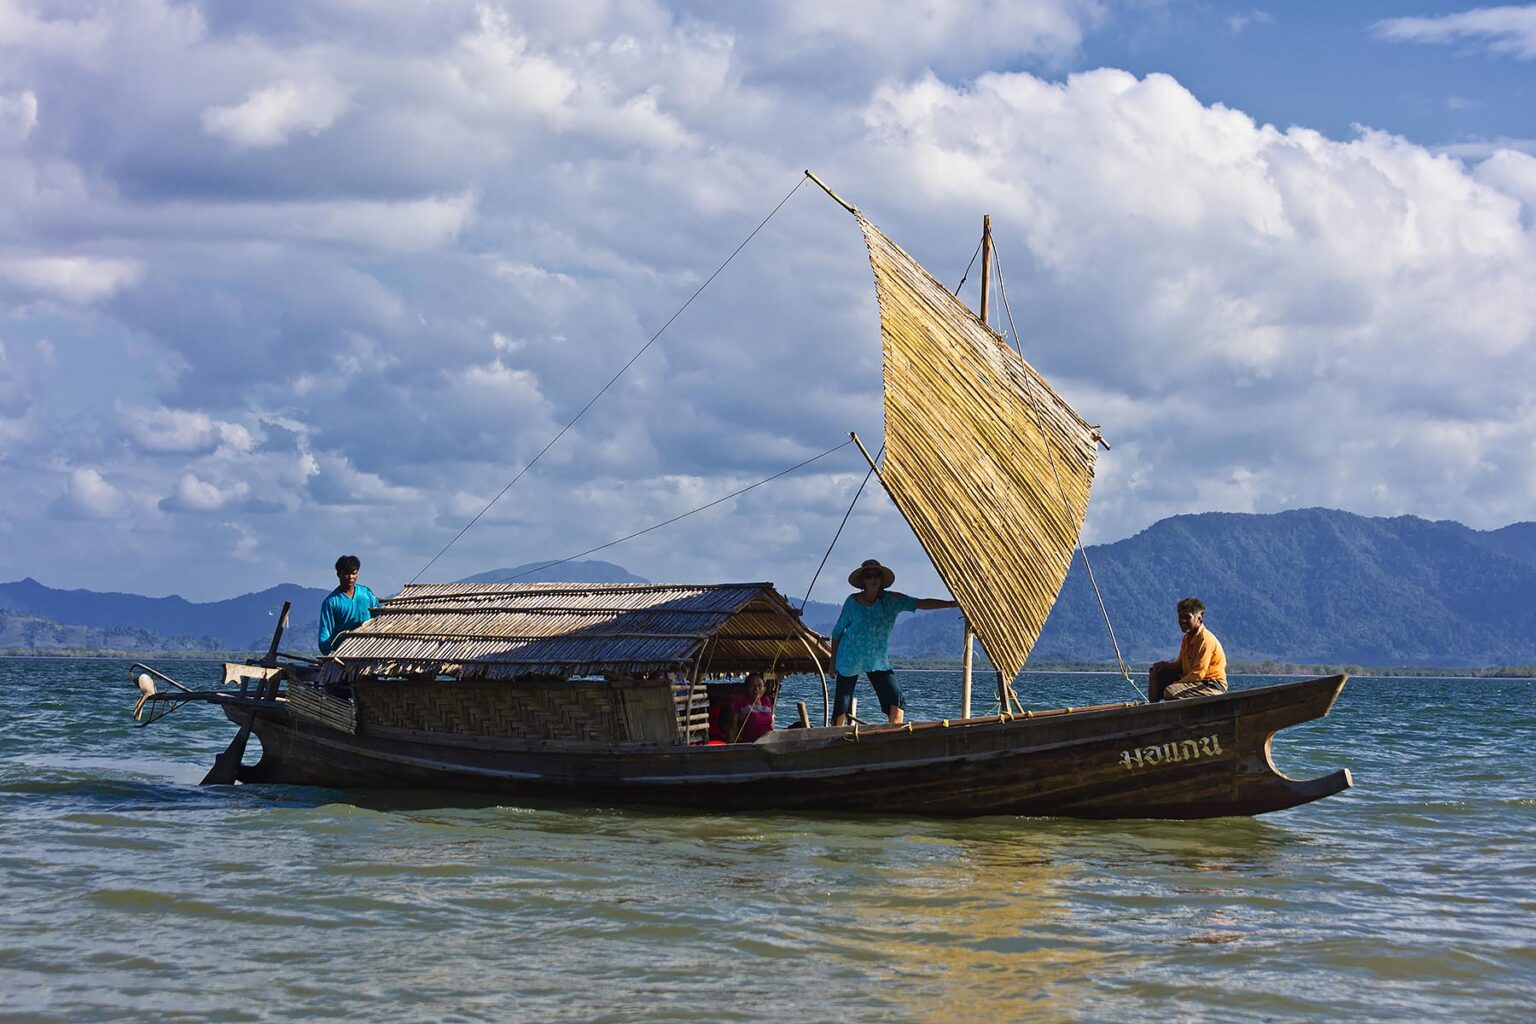 A MOKEN MAN gives a tour on his traditional boat to KHO RA ISLAND in the Andaman Sea - THAILAND